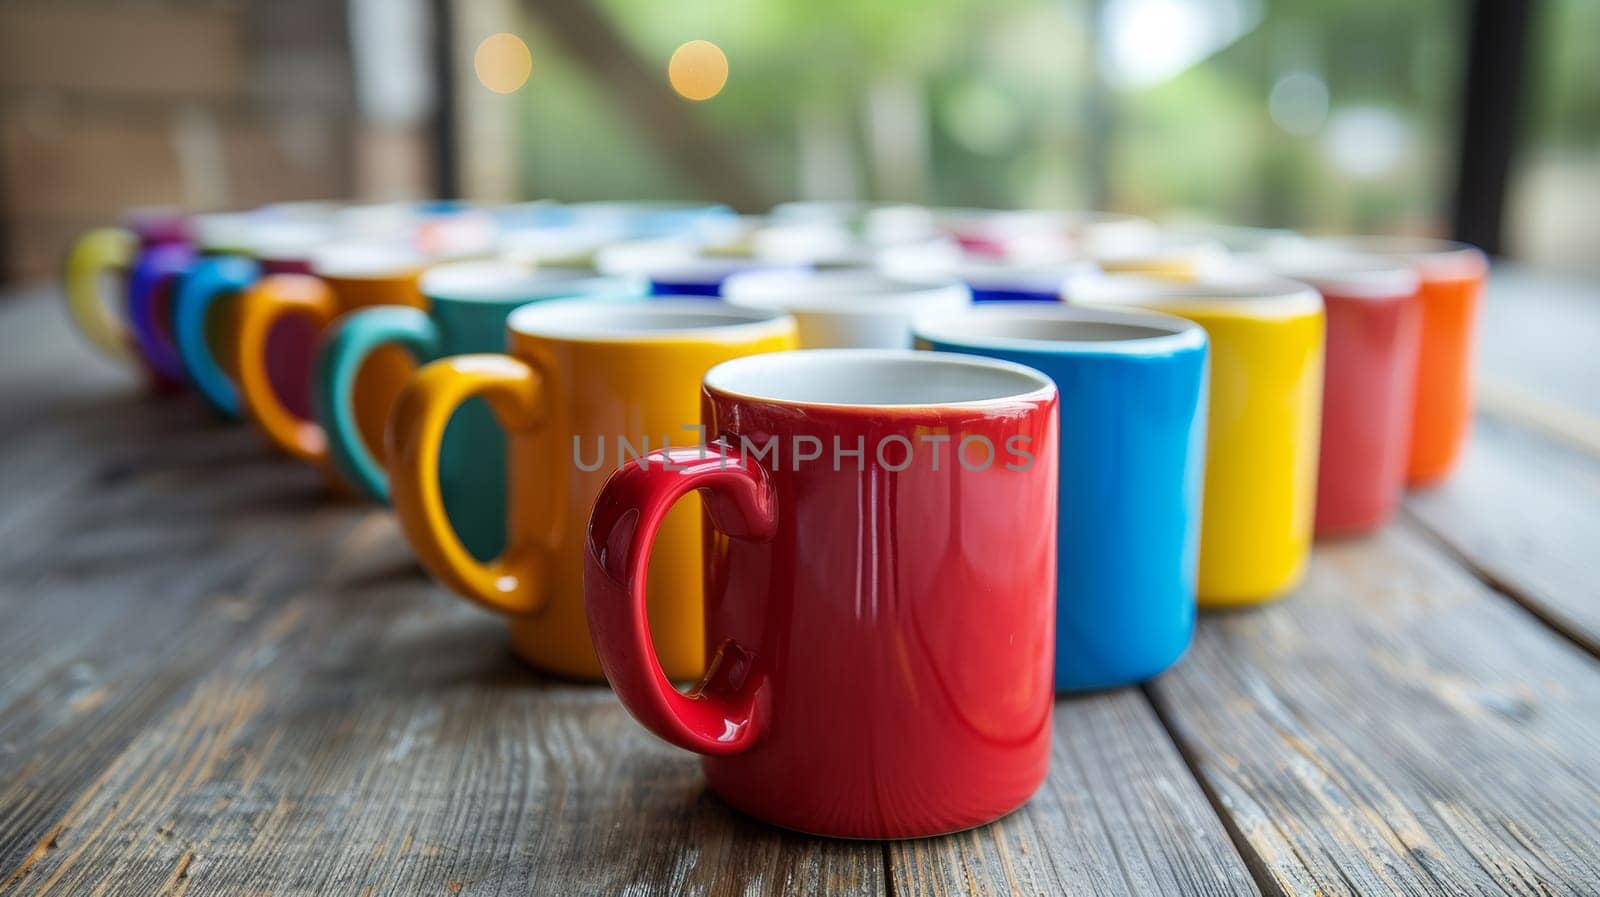 A row of colorful coffee mugs sitting on a wooden table, AI by starush